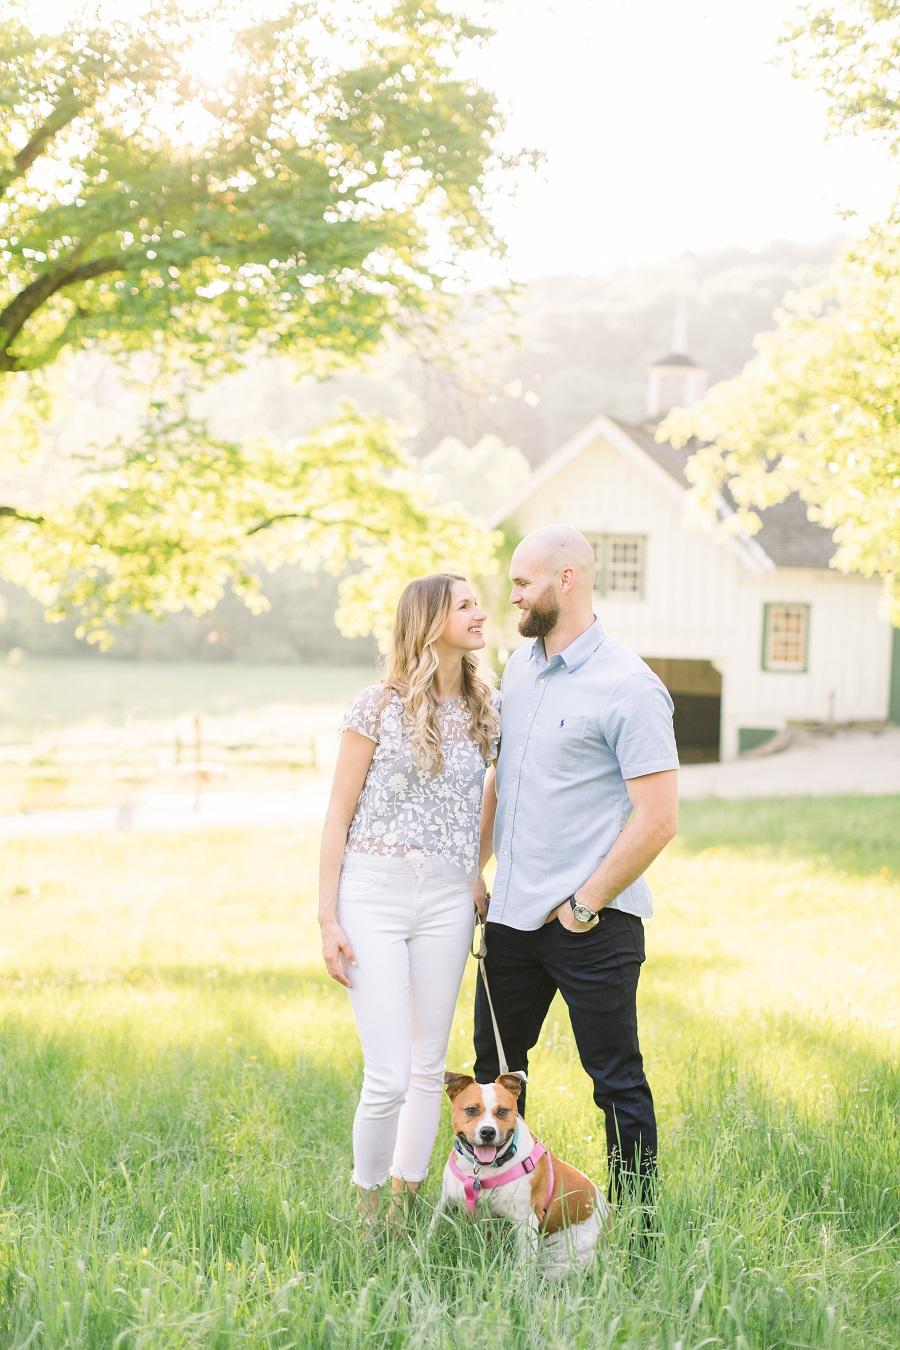 Lovely Engagement at Valley Forge National Historical Park Sarah Canning Photography Philly In Love Philadelphia Weddings Venues Vendors